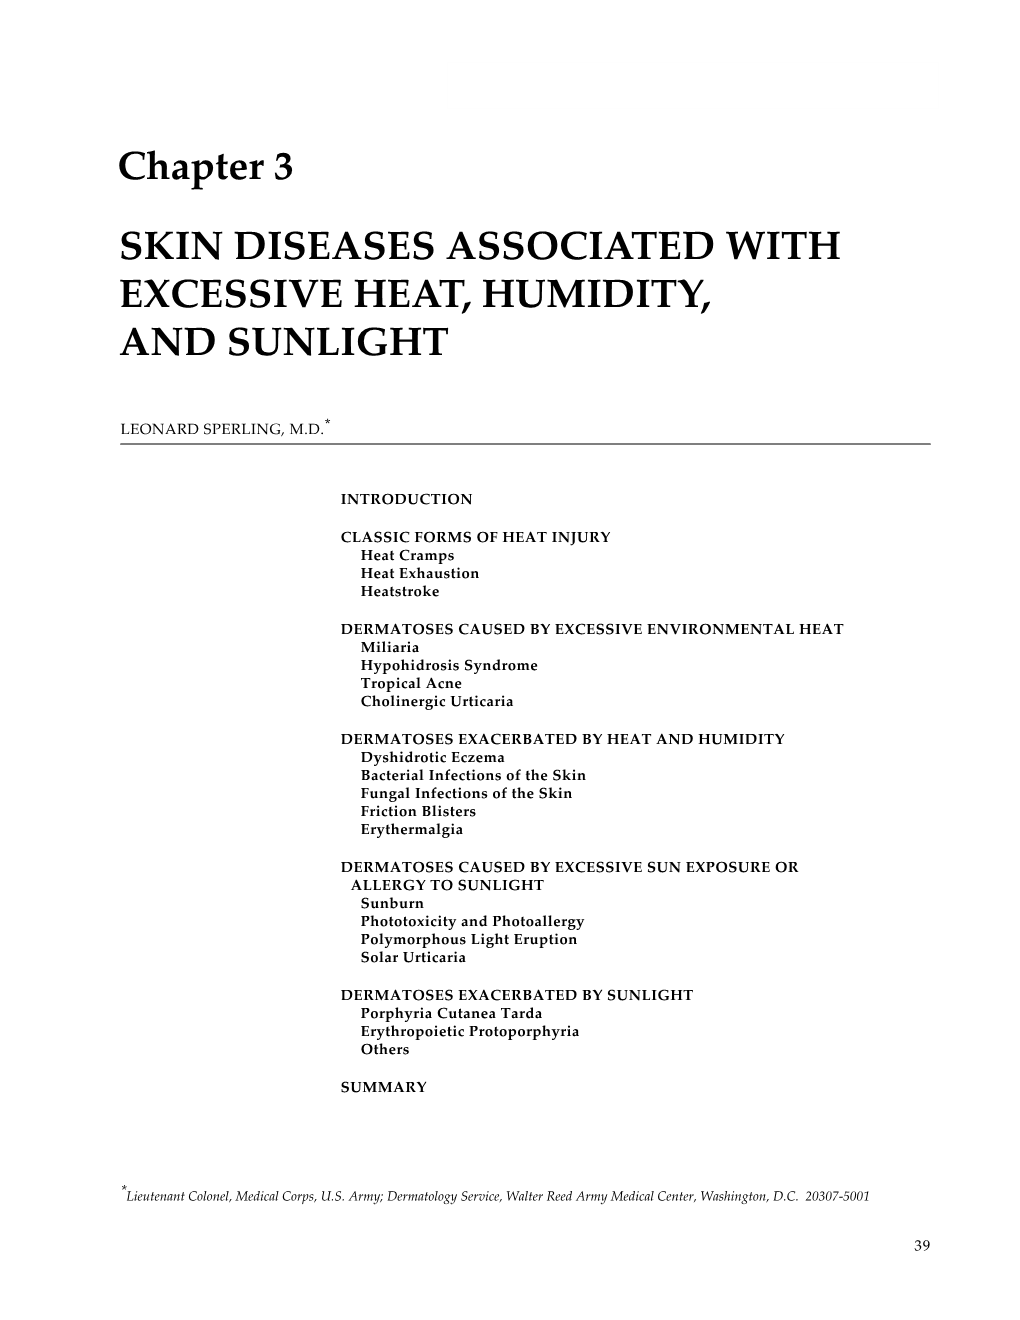 Military Dermatology, Chapter 3, Skin Diseases Associated With